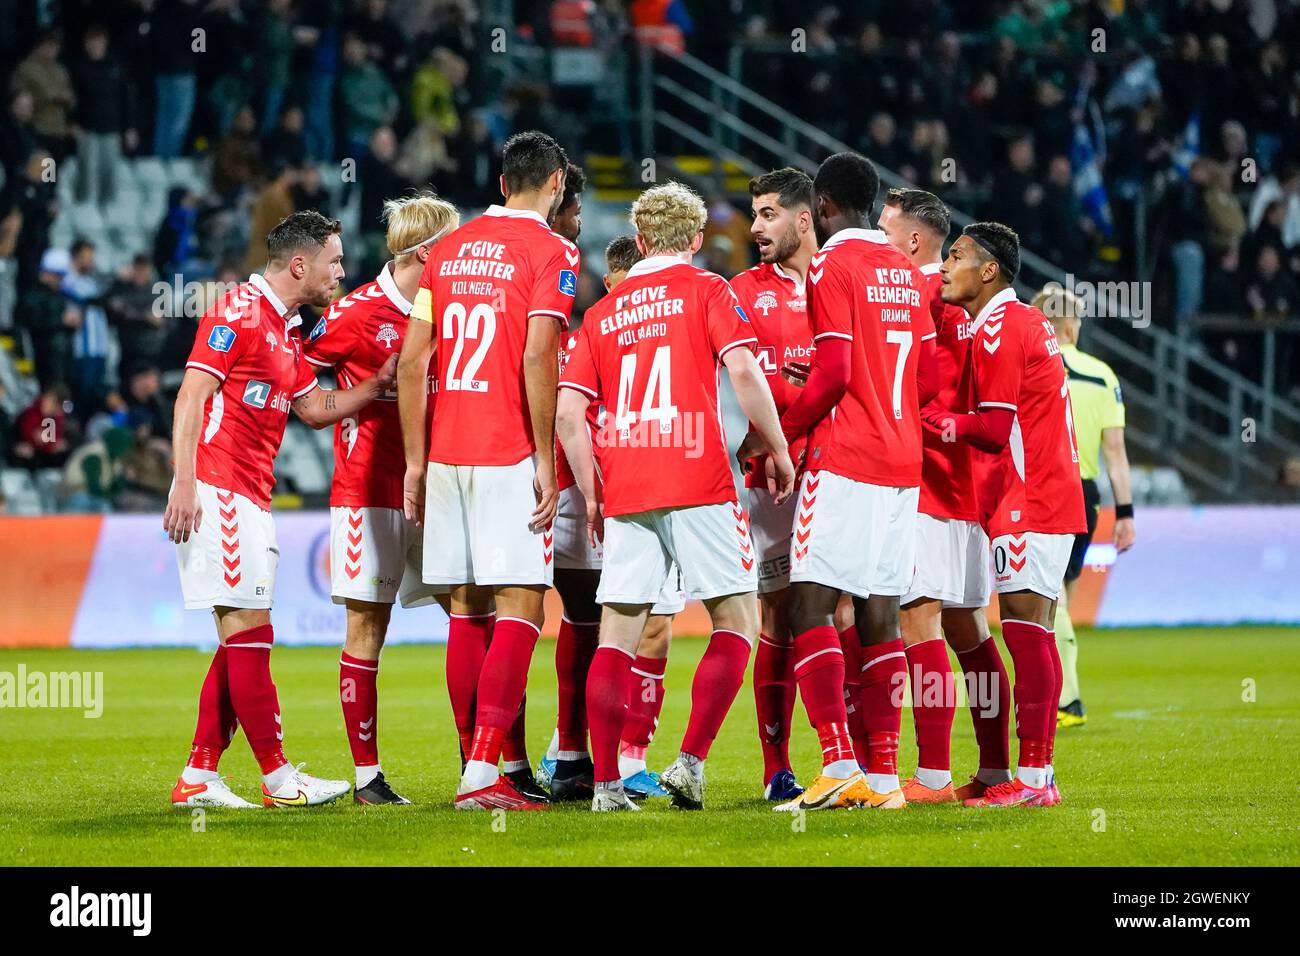 Odense, Denmark. 01st, October 2021. The players of Vejle Boldklub  unite in a circle after being 3-0 down after 8 minutes during the 3F Superliga match between Odense Boldklub and Vejle Boldklub at Nature Energy Park in Odense. (Photo credit: Gonzales Photo - Kent Rasmussen). Stock Photo